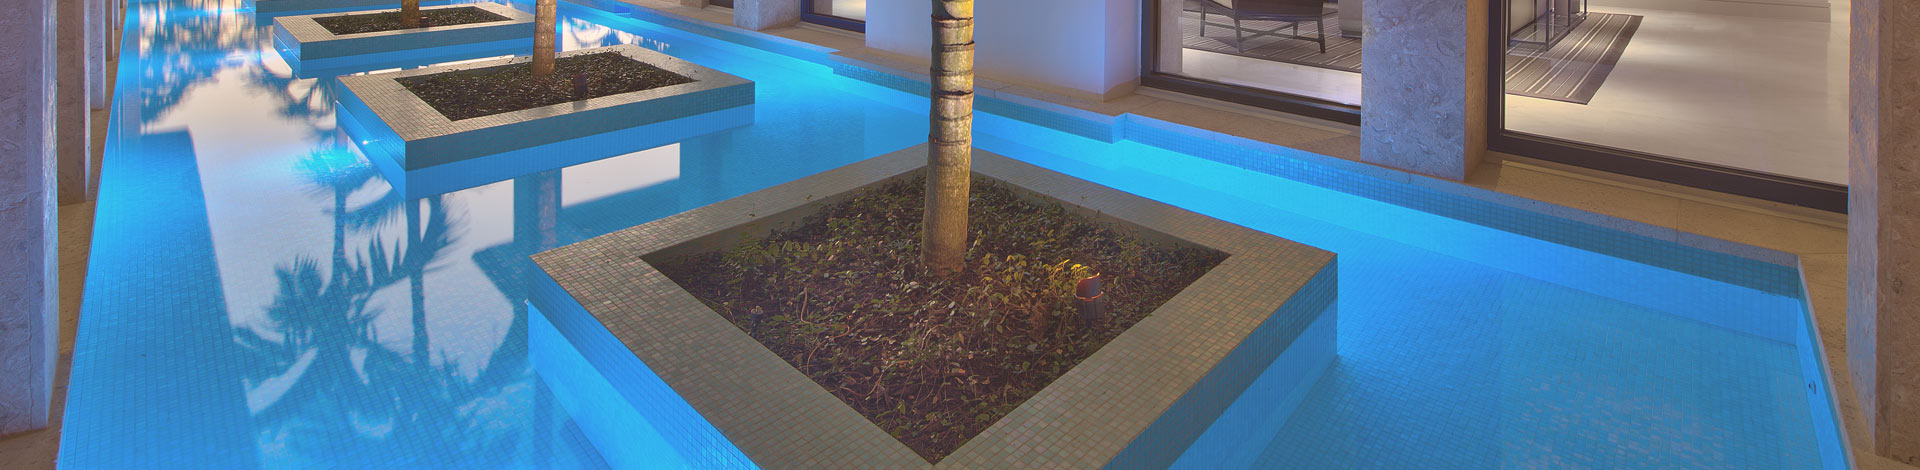 Pool with Trees | Outside Productions International